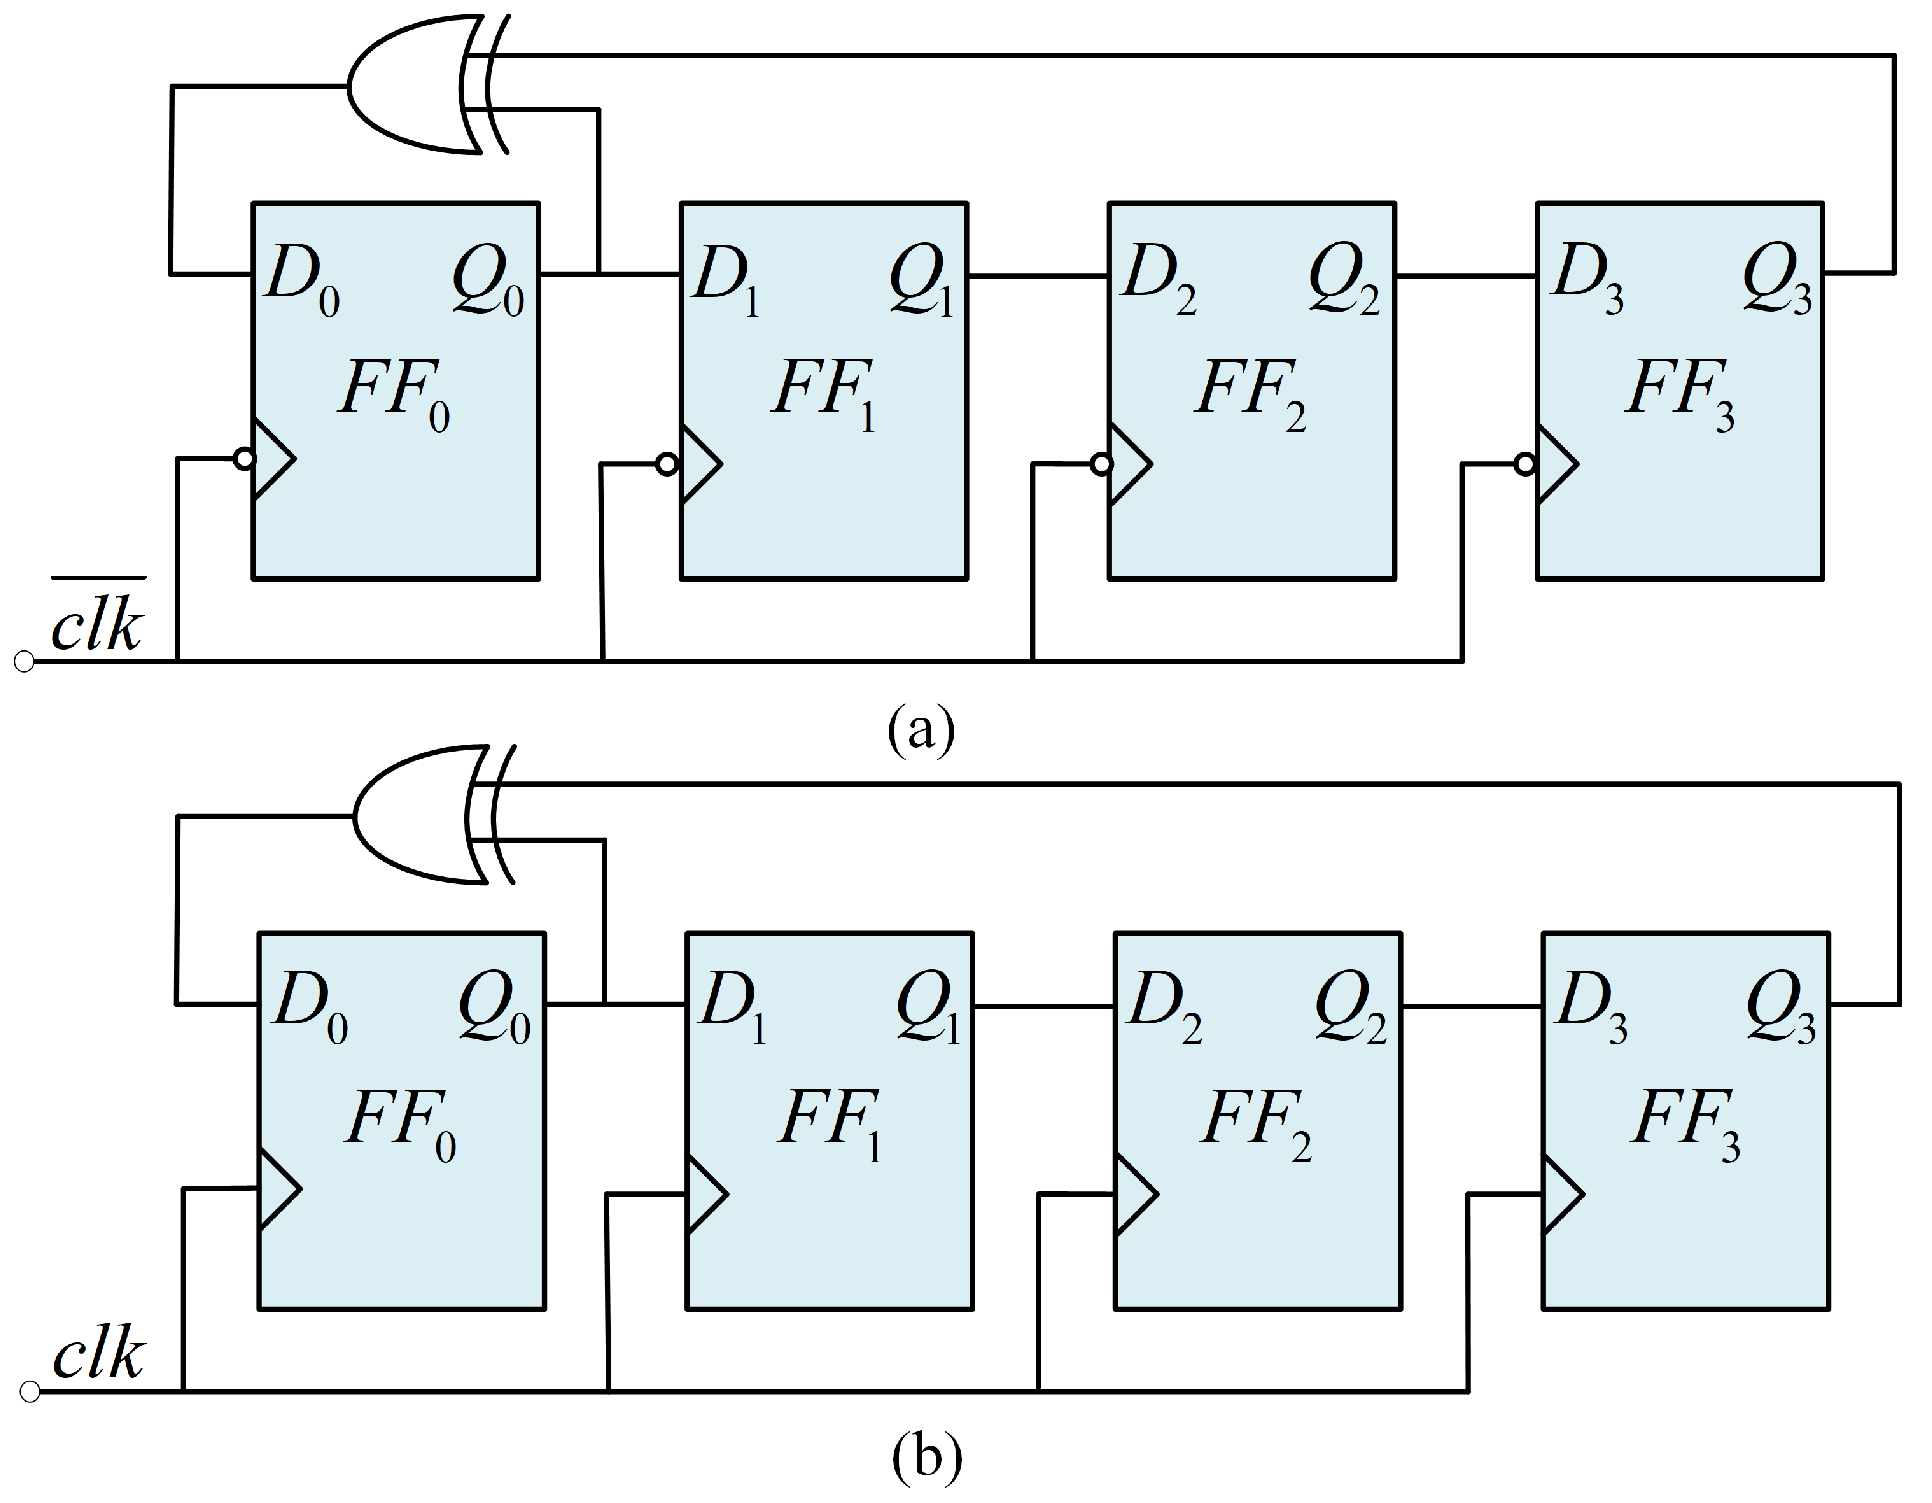 Synchronous Counter Design Using Synthesizable Constructs | SpringerLink